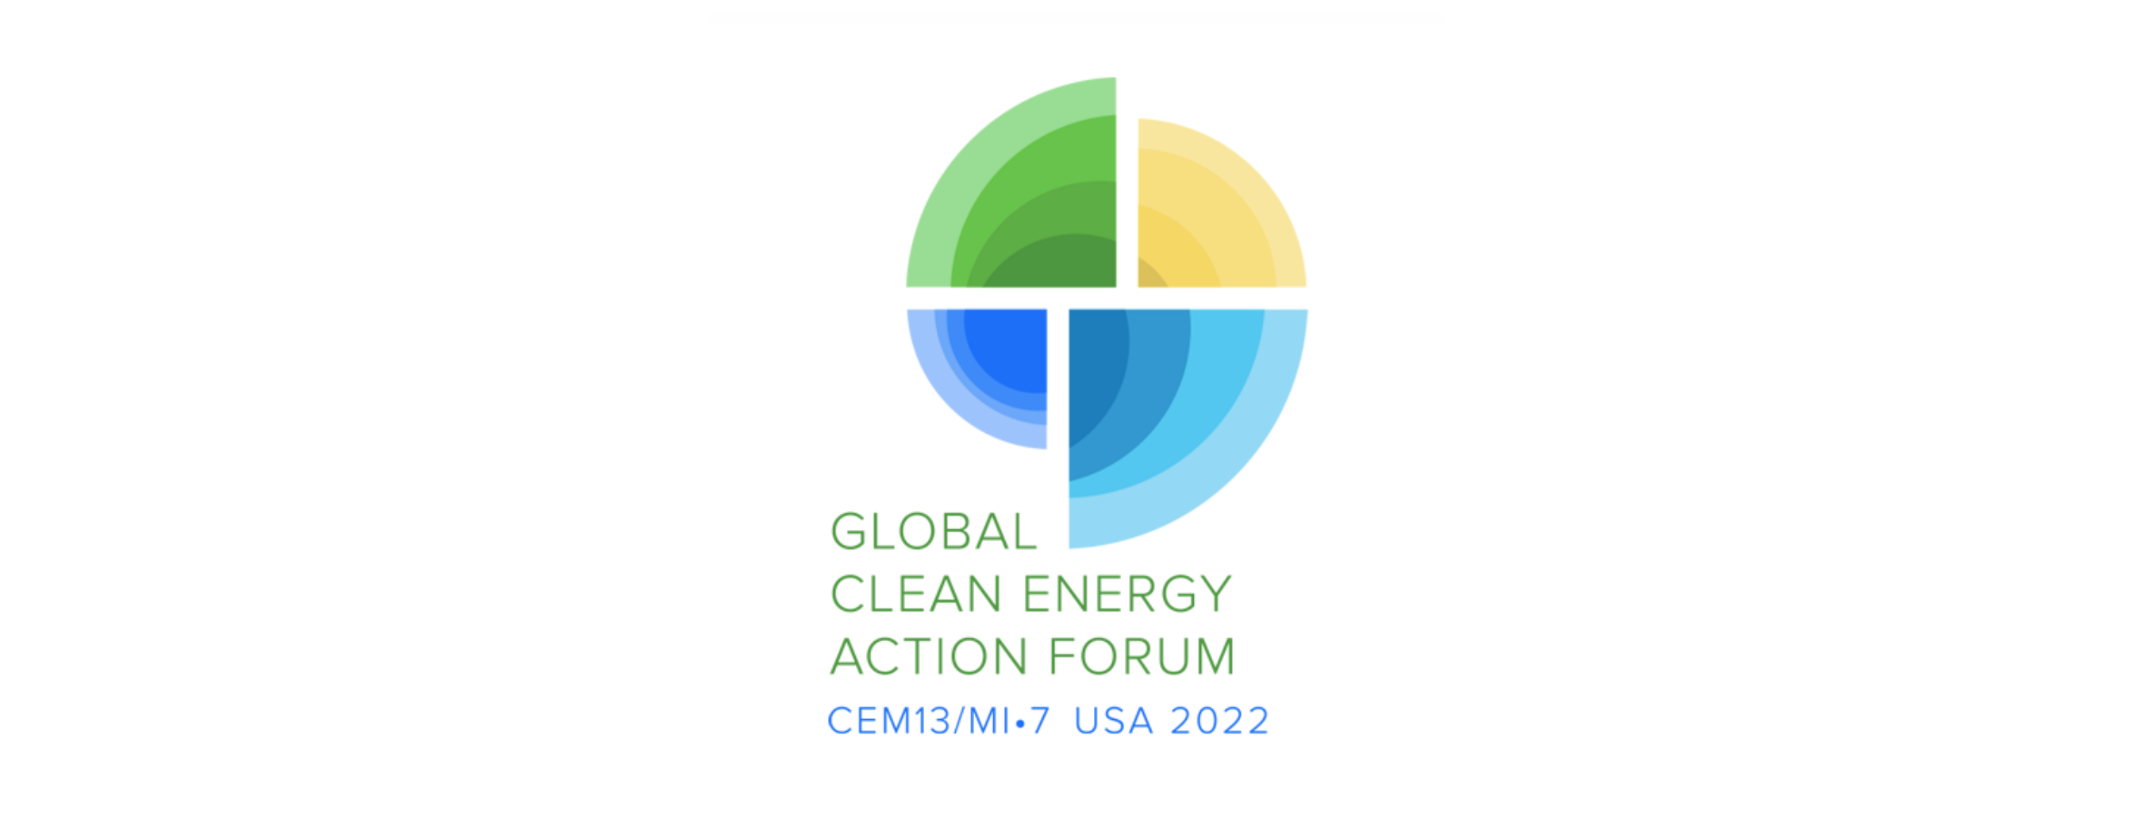 The Gender Energy Compact at the Global Clean Energy Action Forum